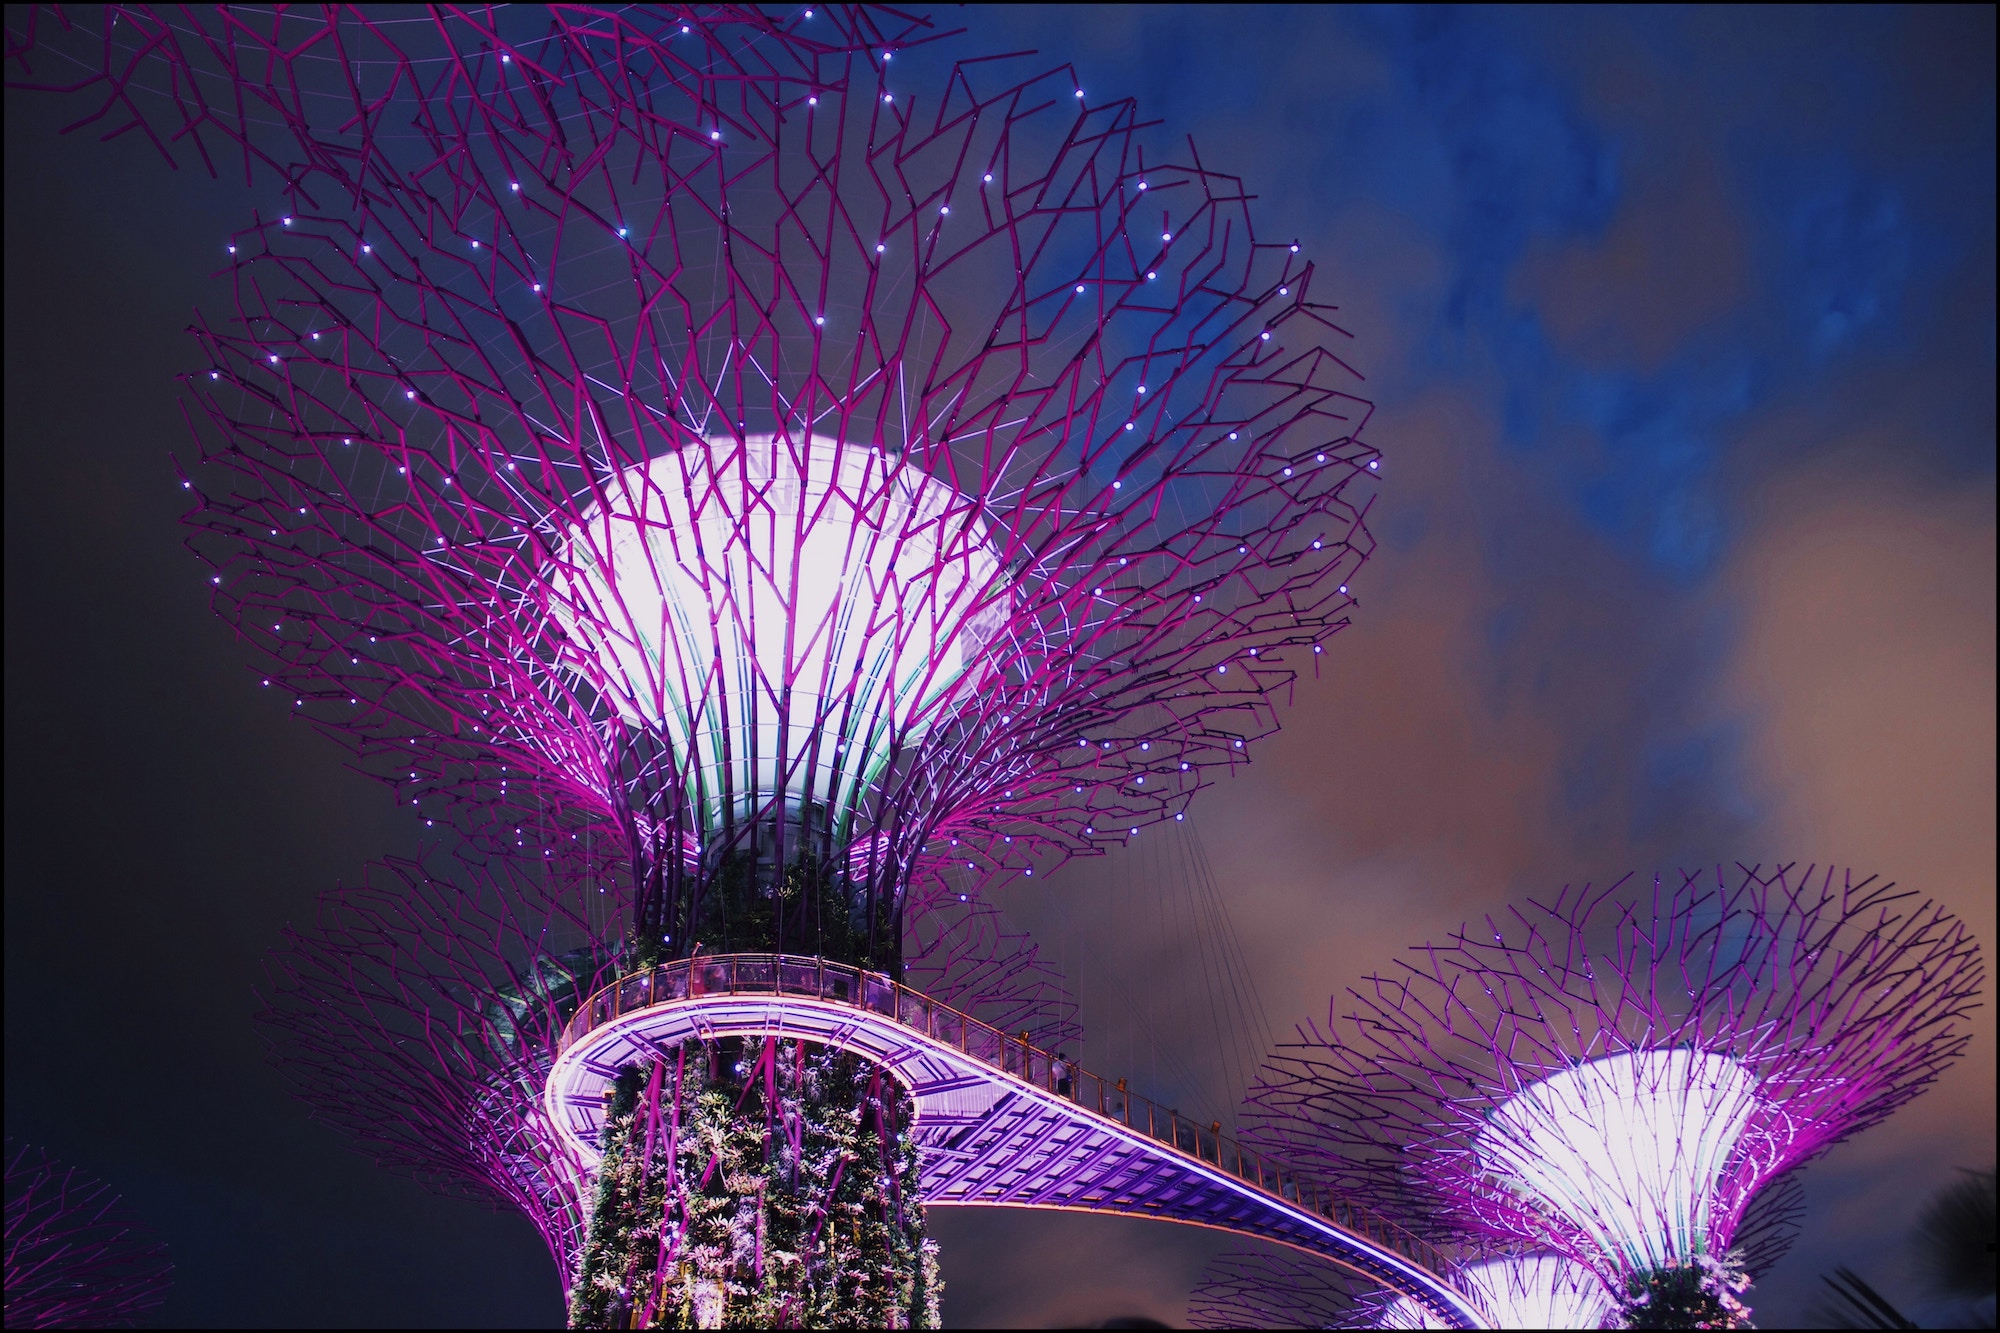 Man-made tree structures covered in plant-life and soft purple lighting, against the night sky